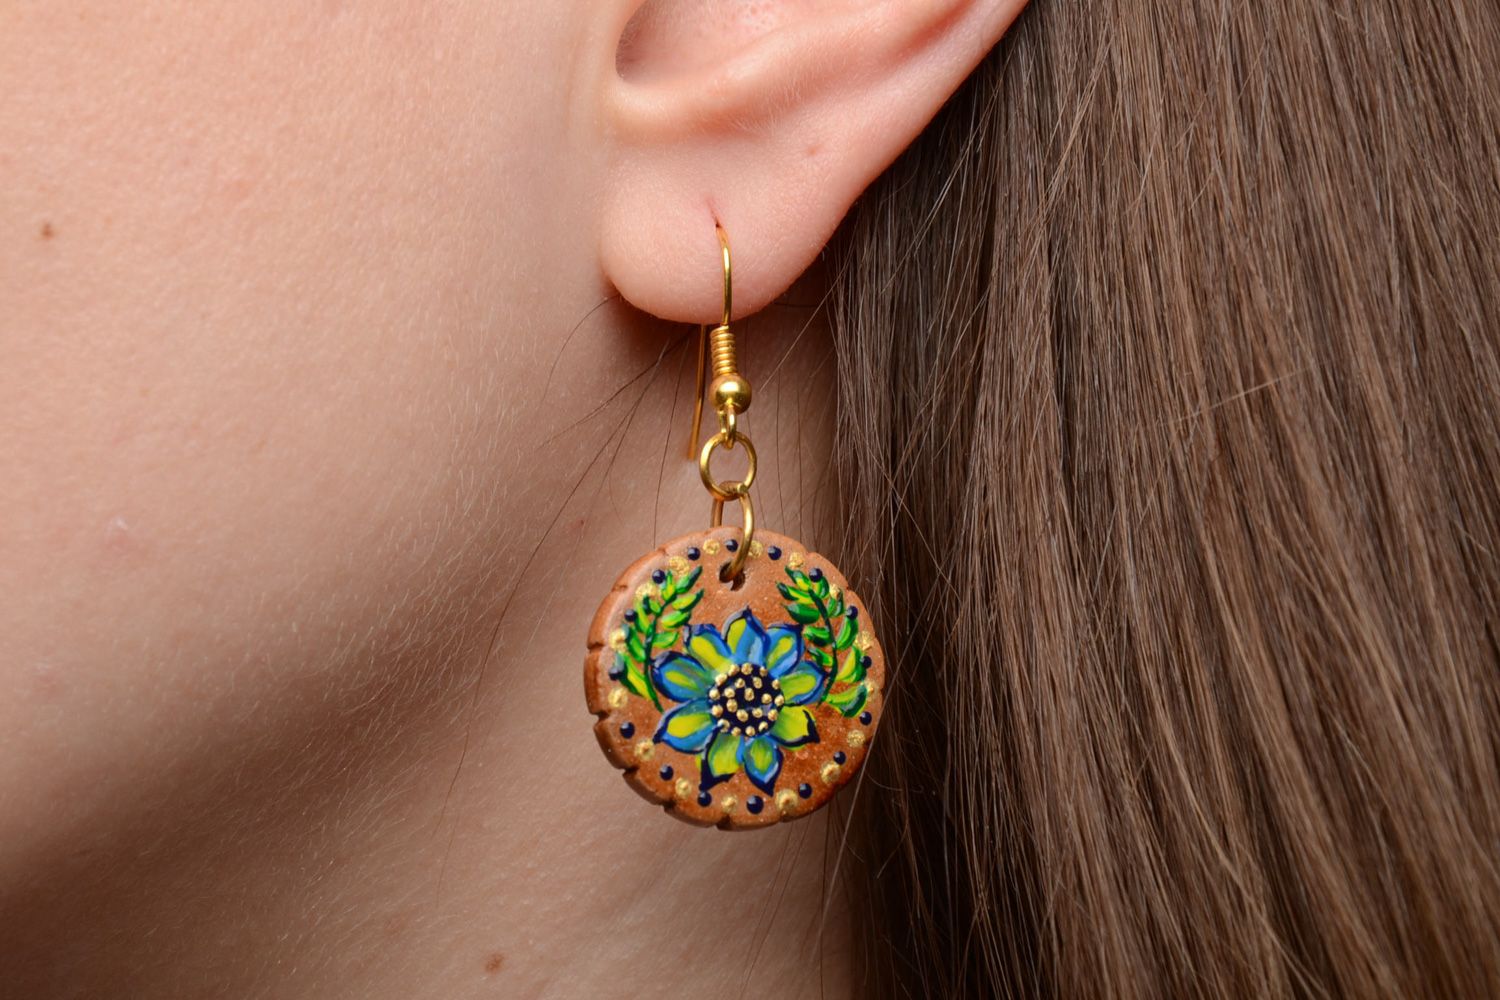 Handmade festive round ceramic earrings painted with acrylics in ethnic style photo 2